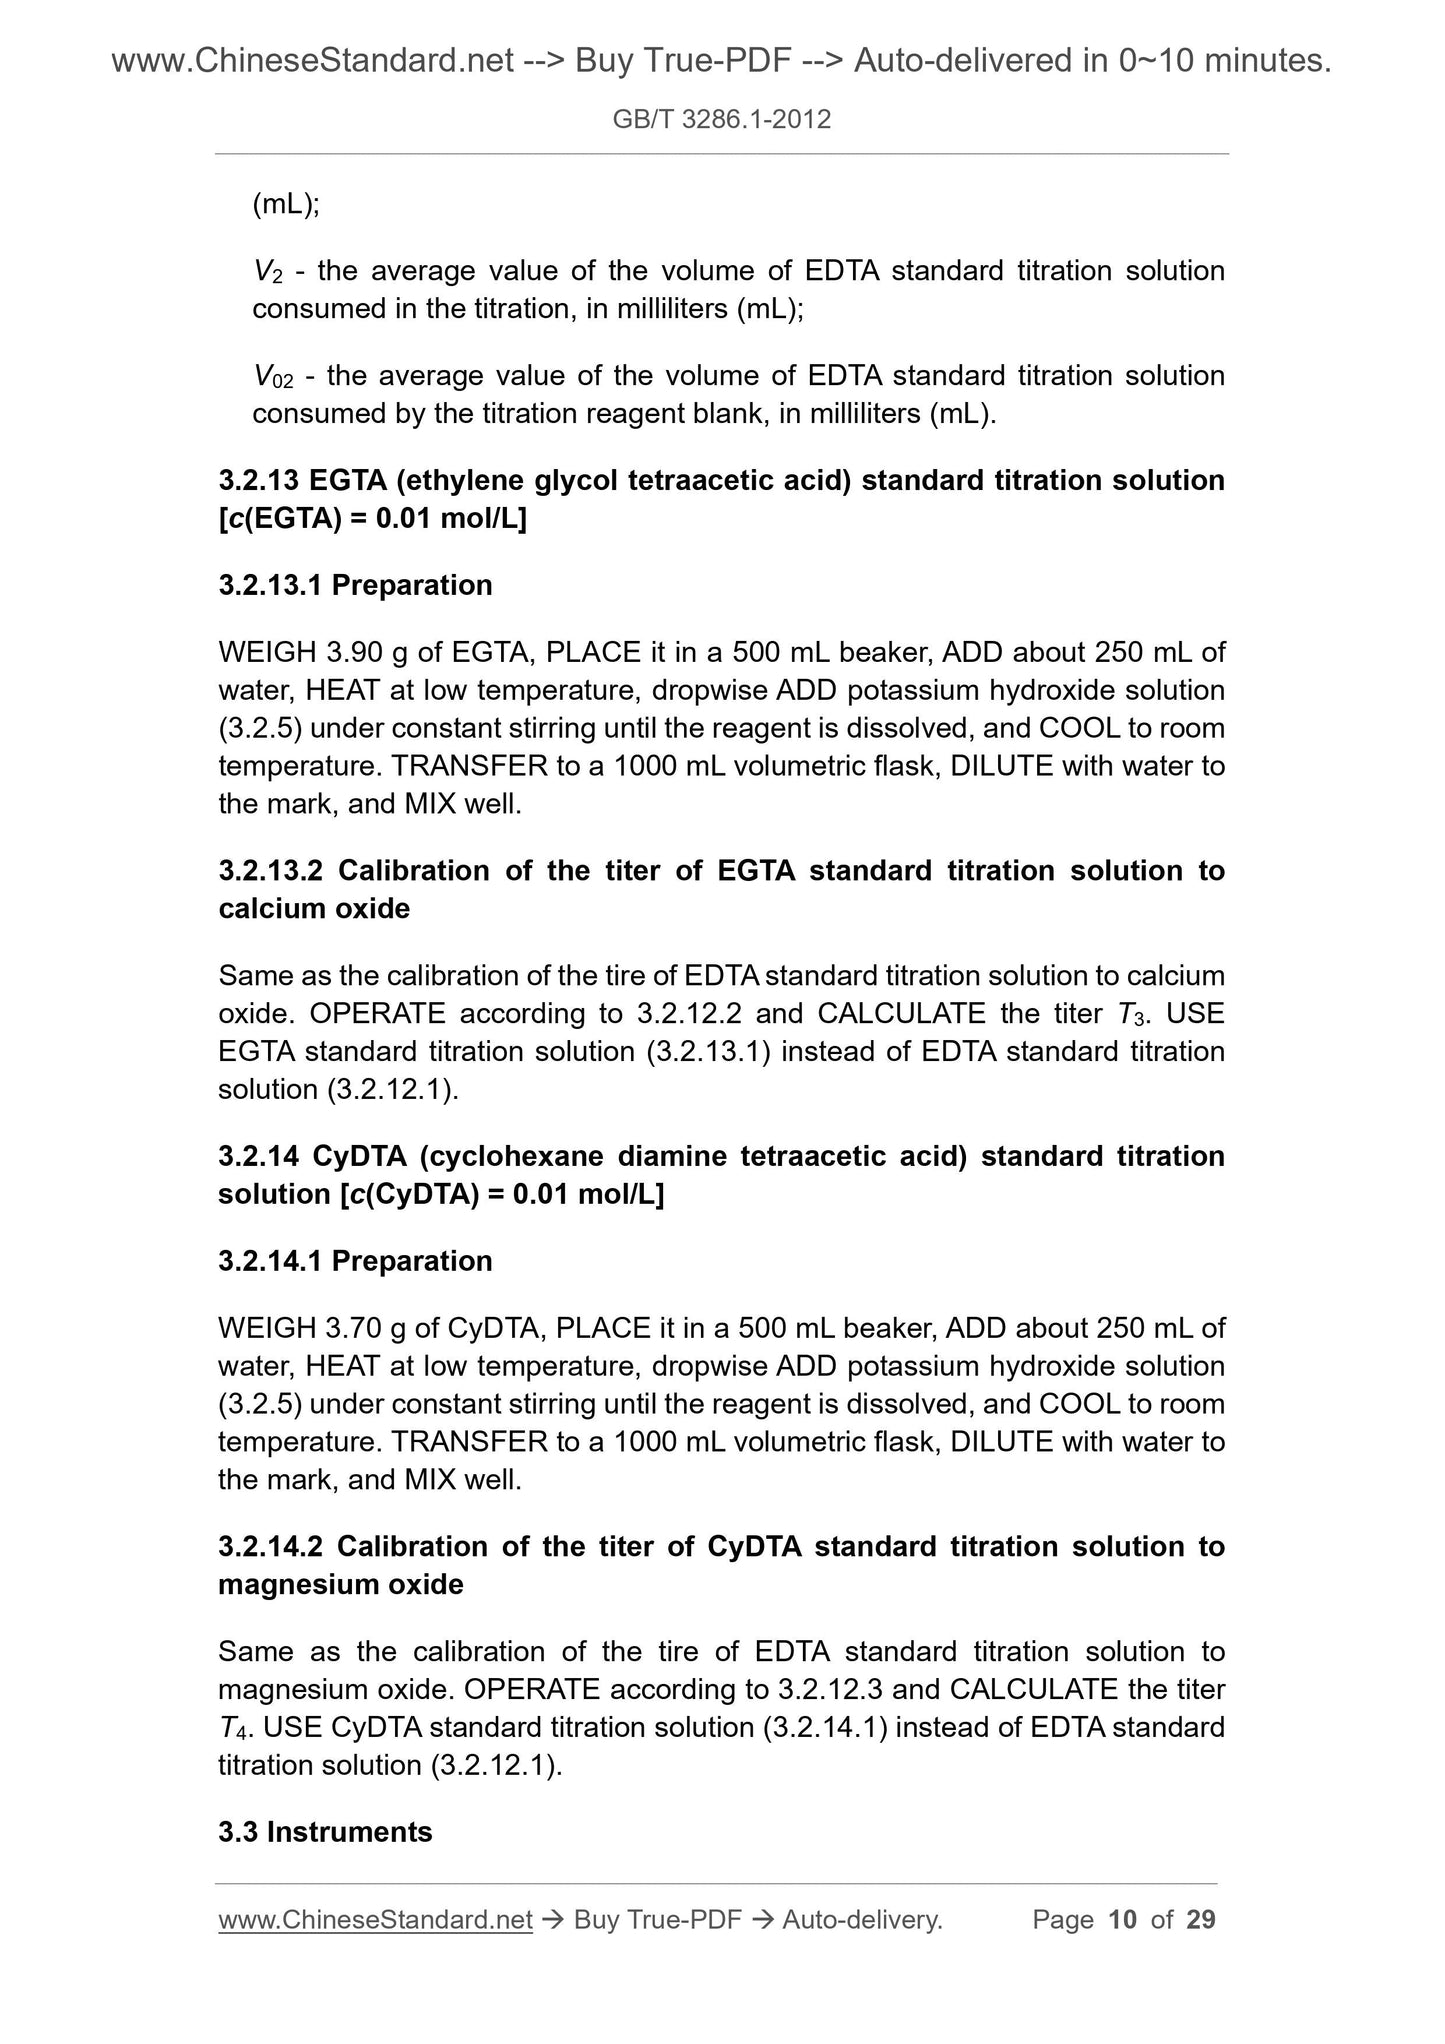 GB/T 3286.1-2012 Page 5